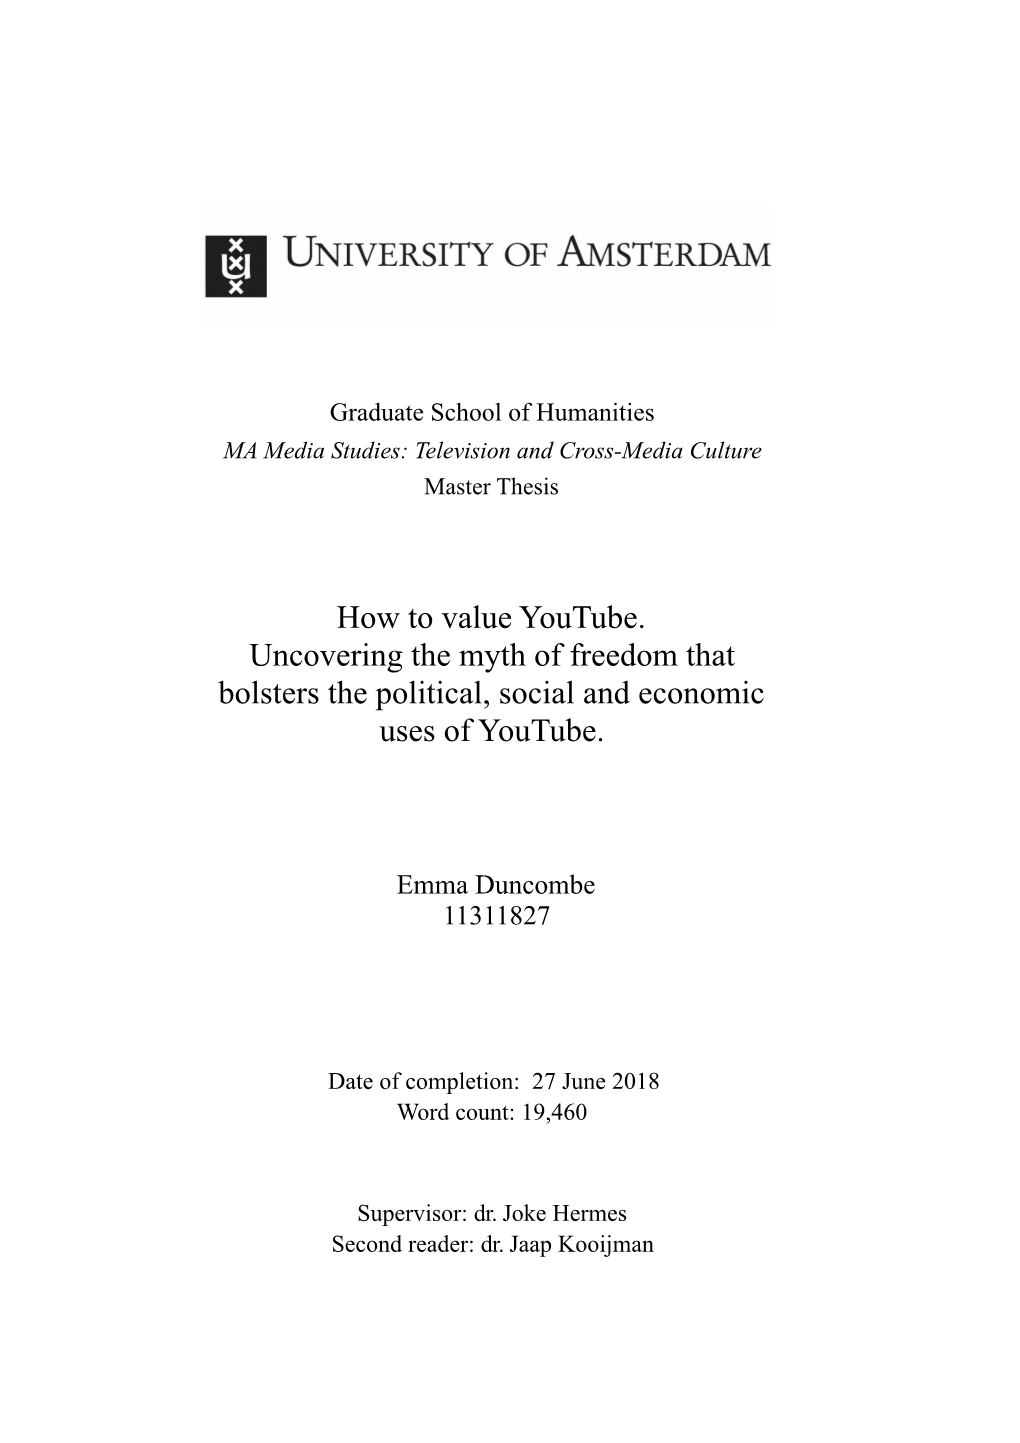 How to Value Youtube. Uncovering the Myth of Freedom That Bolsters the Political, Social and Economic Uses of Youtube